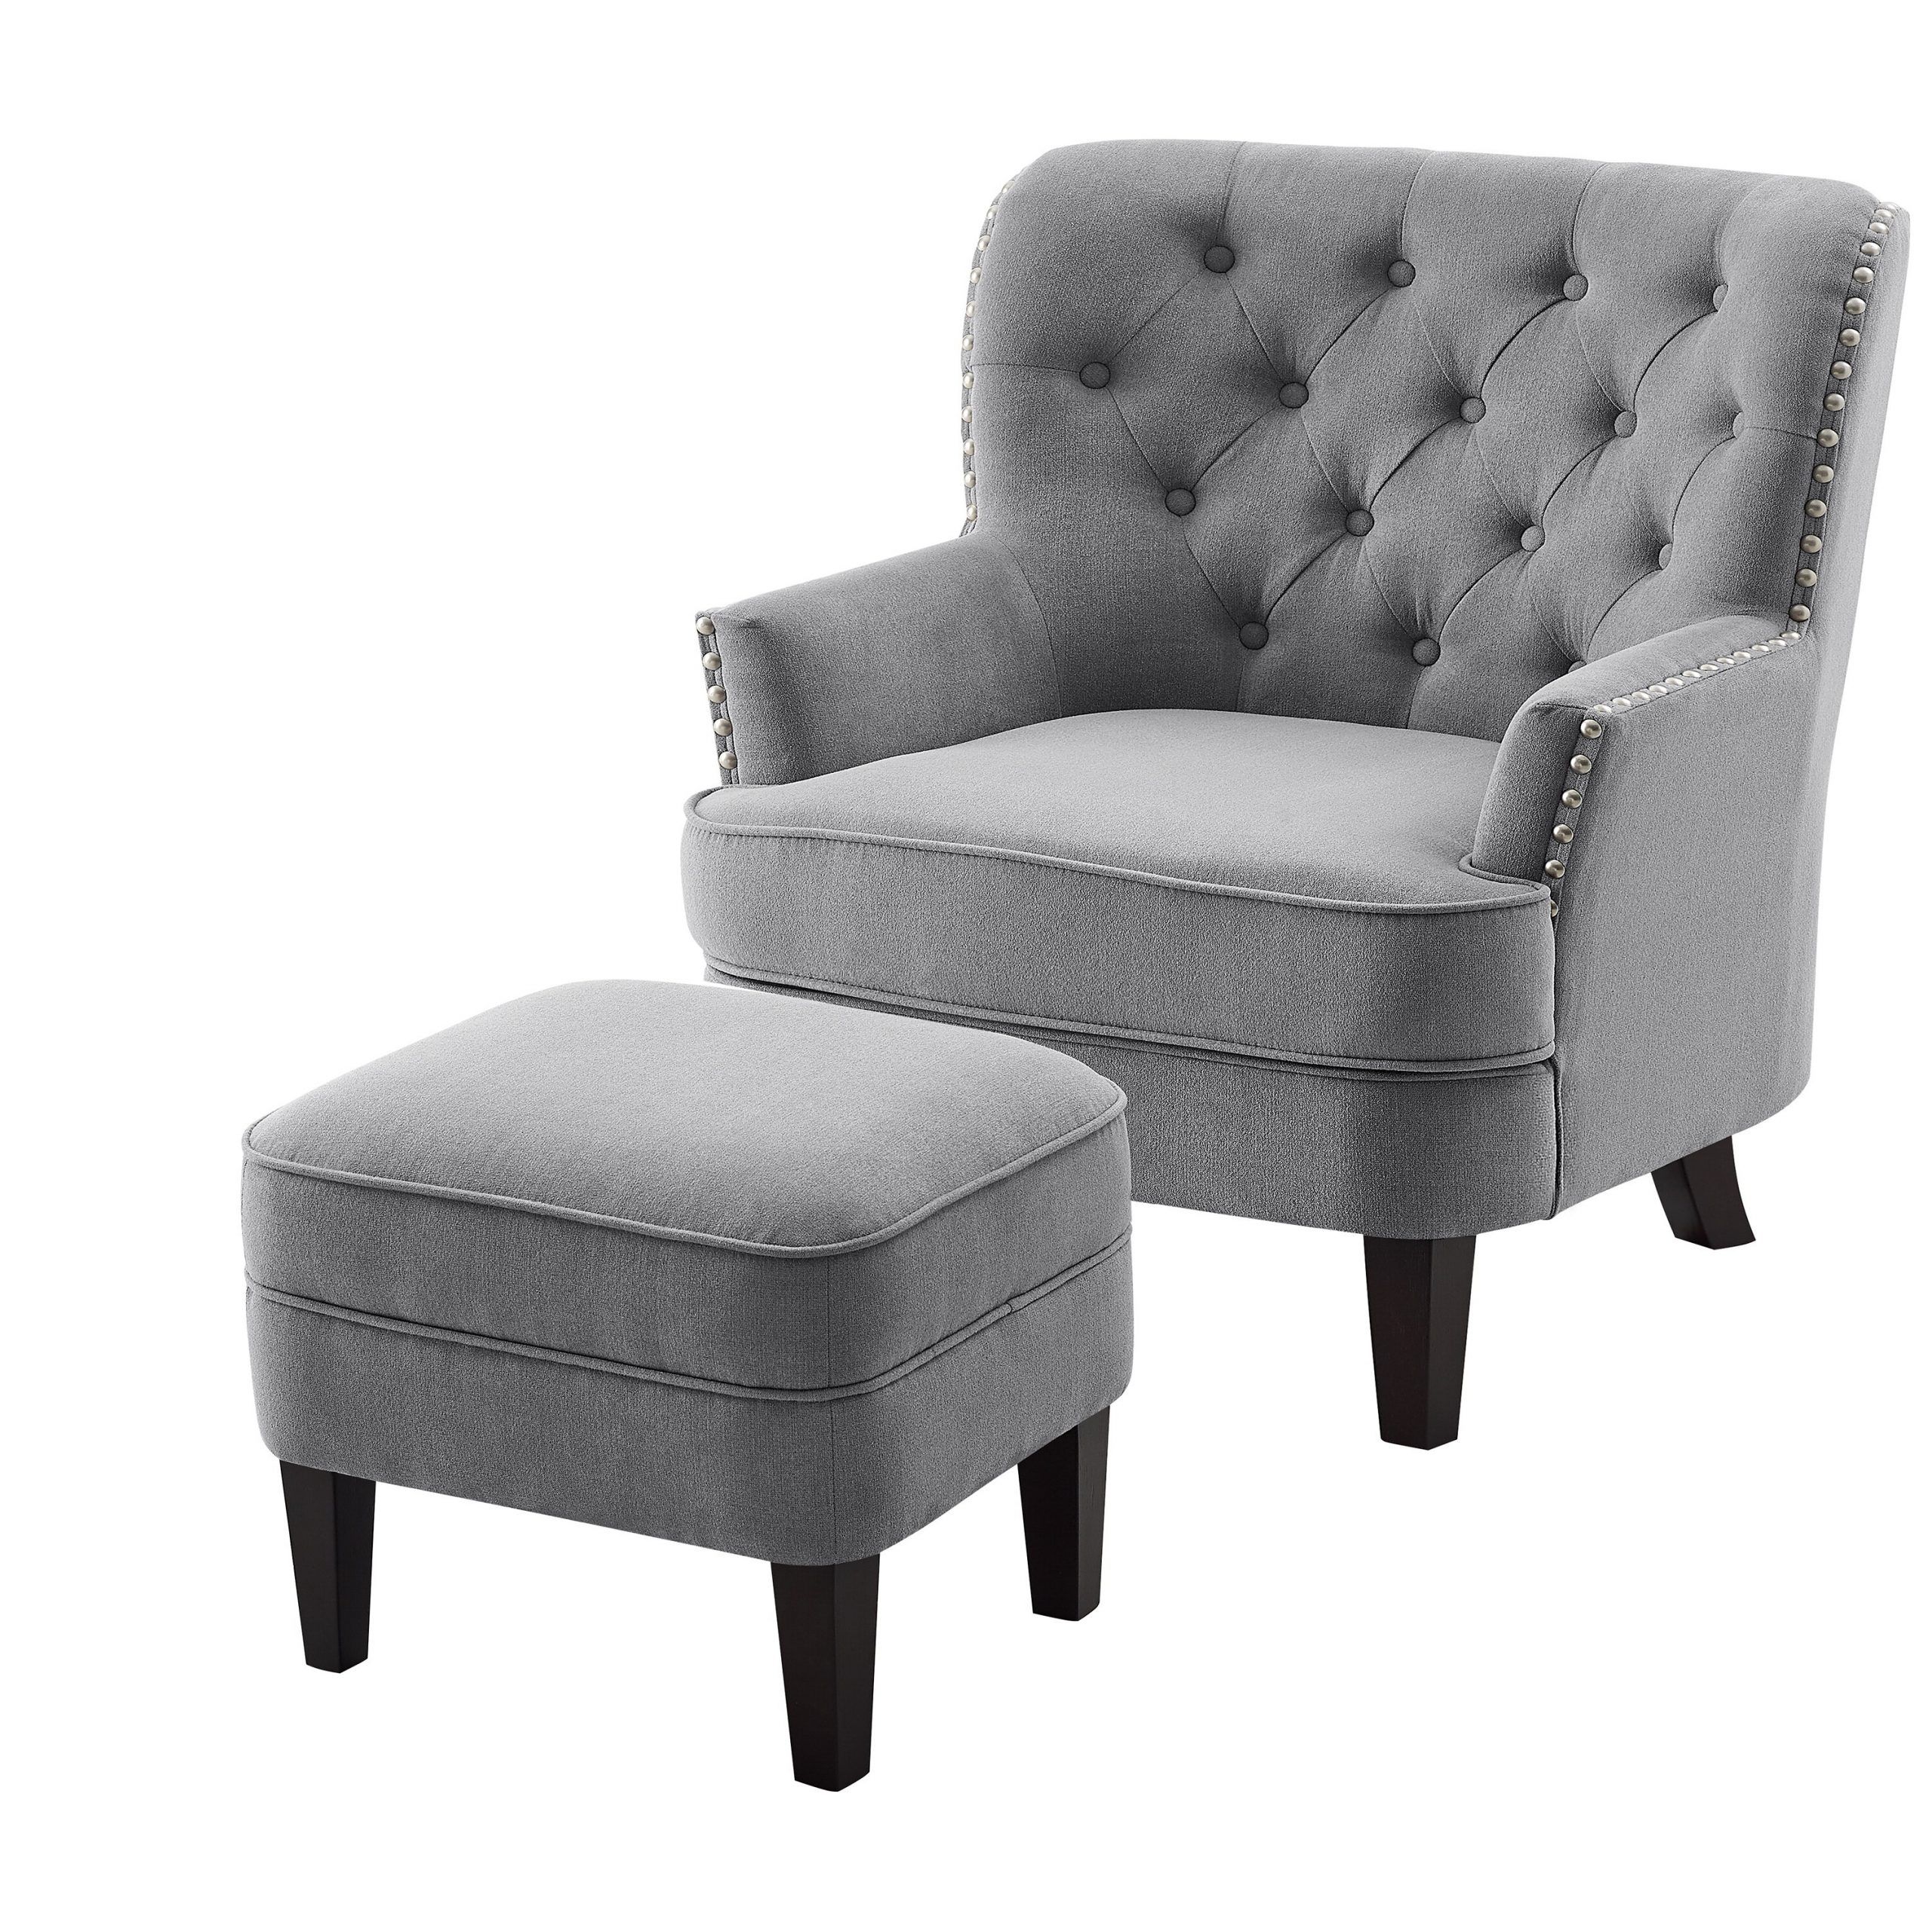 Suki Armchairs By Canora Grey With Regard To Most Popular Ivo 30" W Tufted Wingback Chair (View 5 of 20)